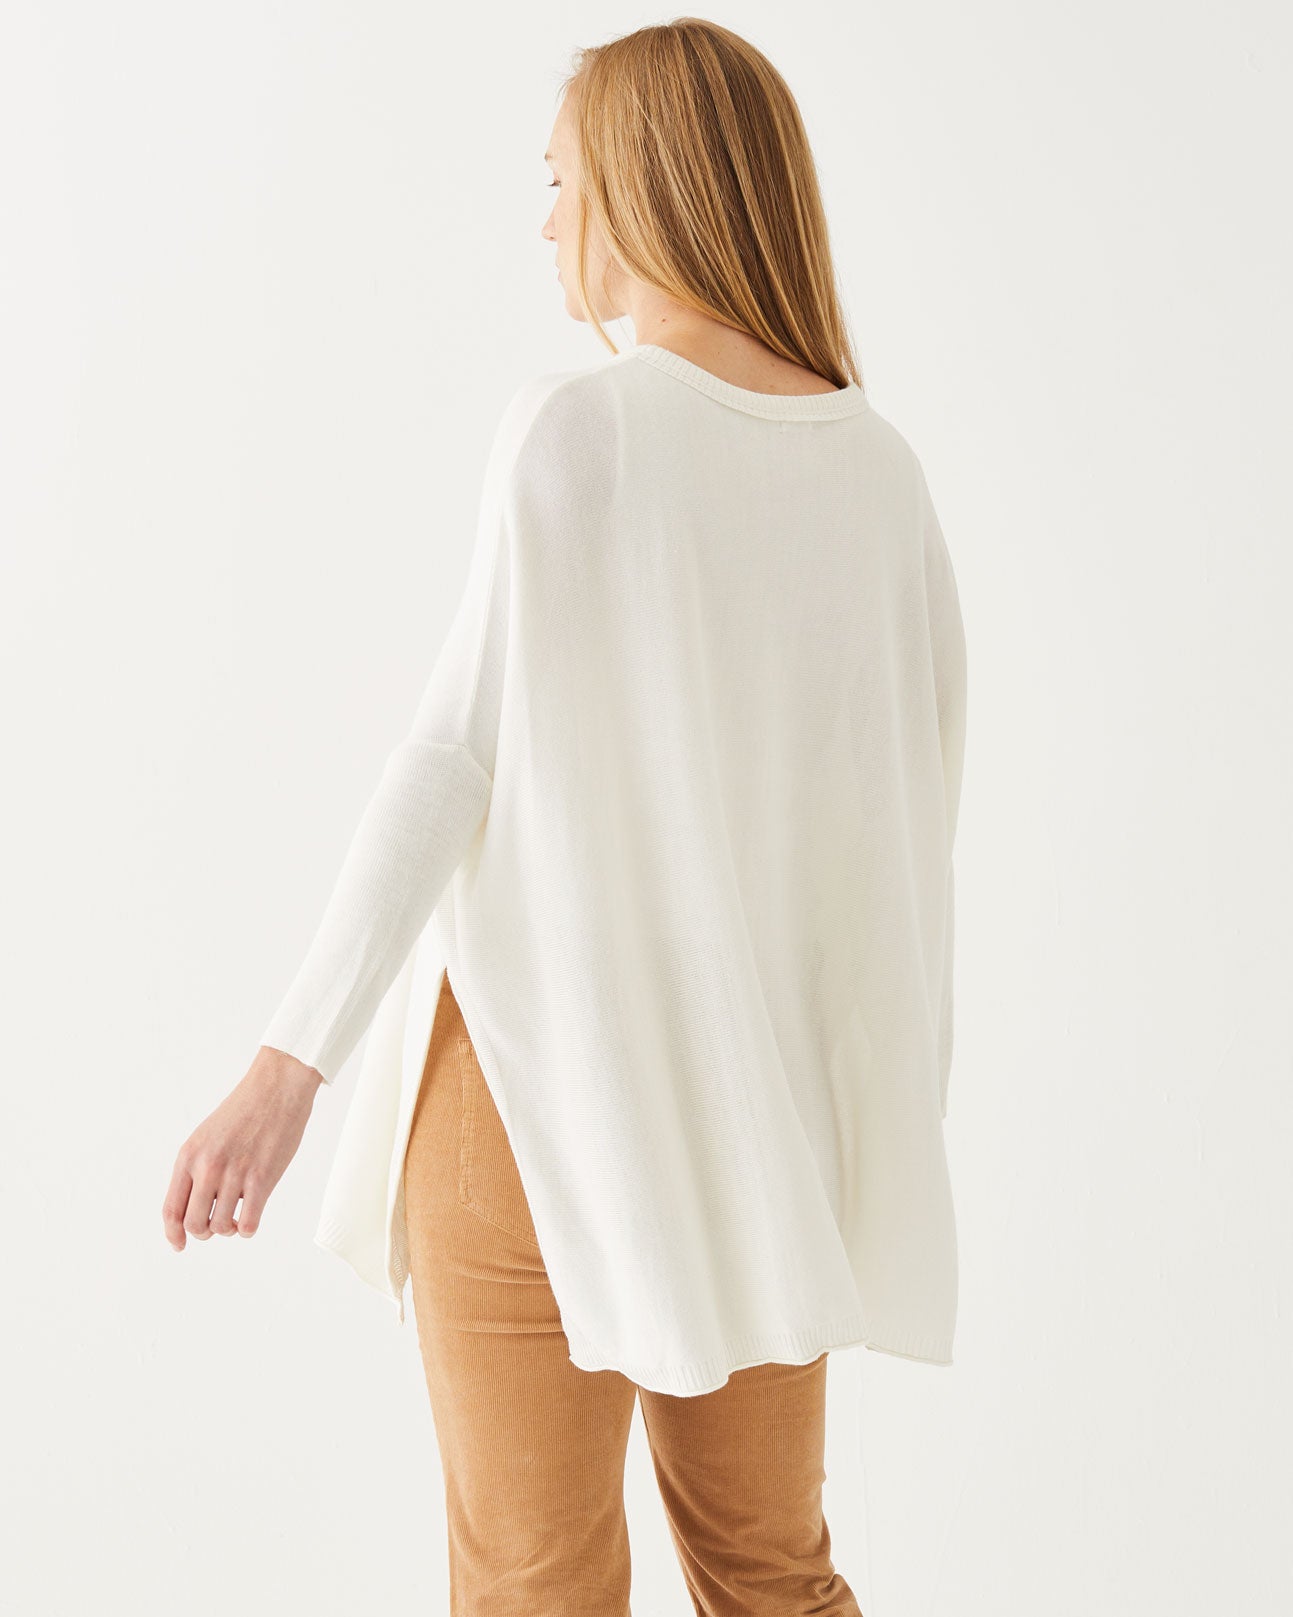 White stripes Catalina oversized crewneck sweater with split sides and pocket details